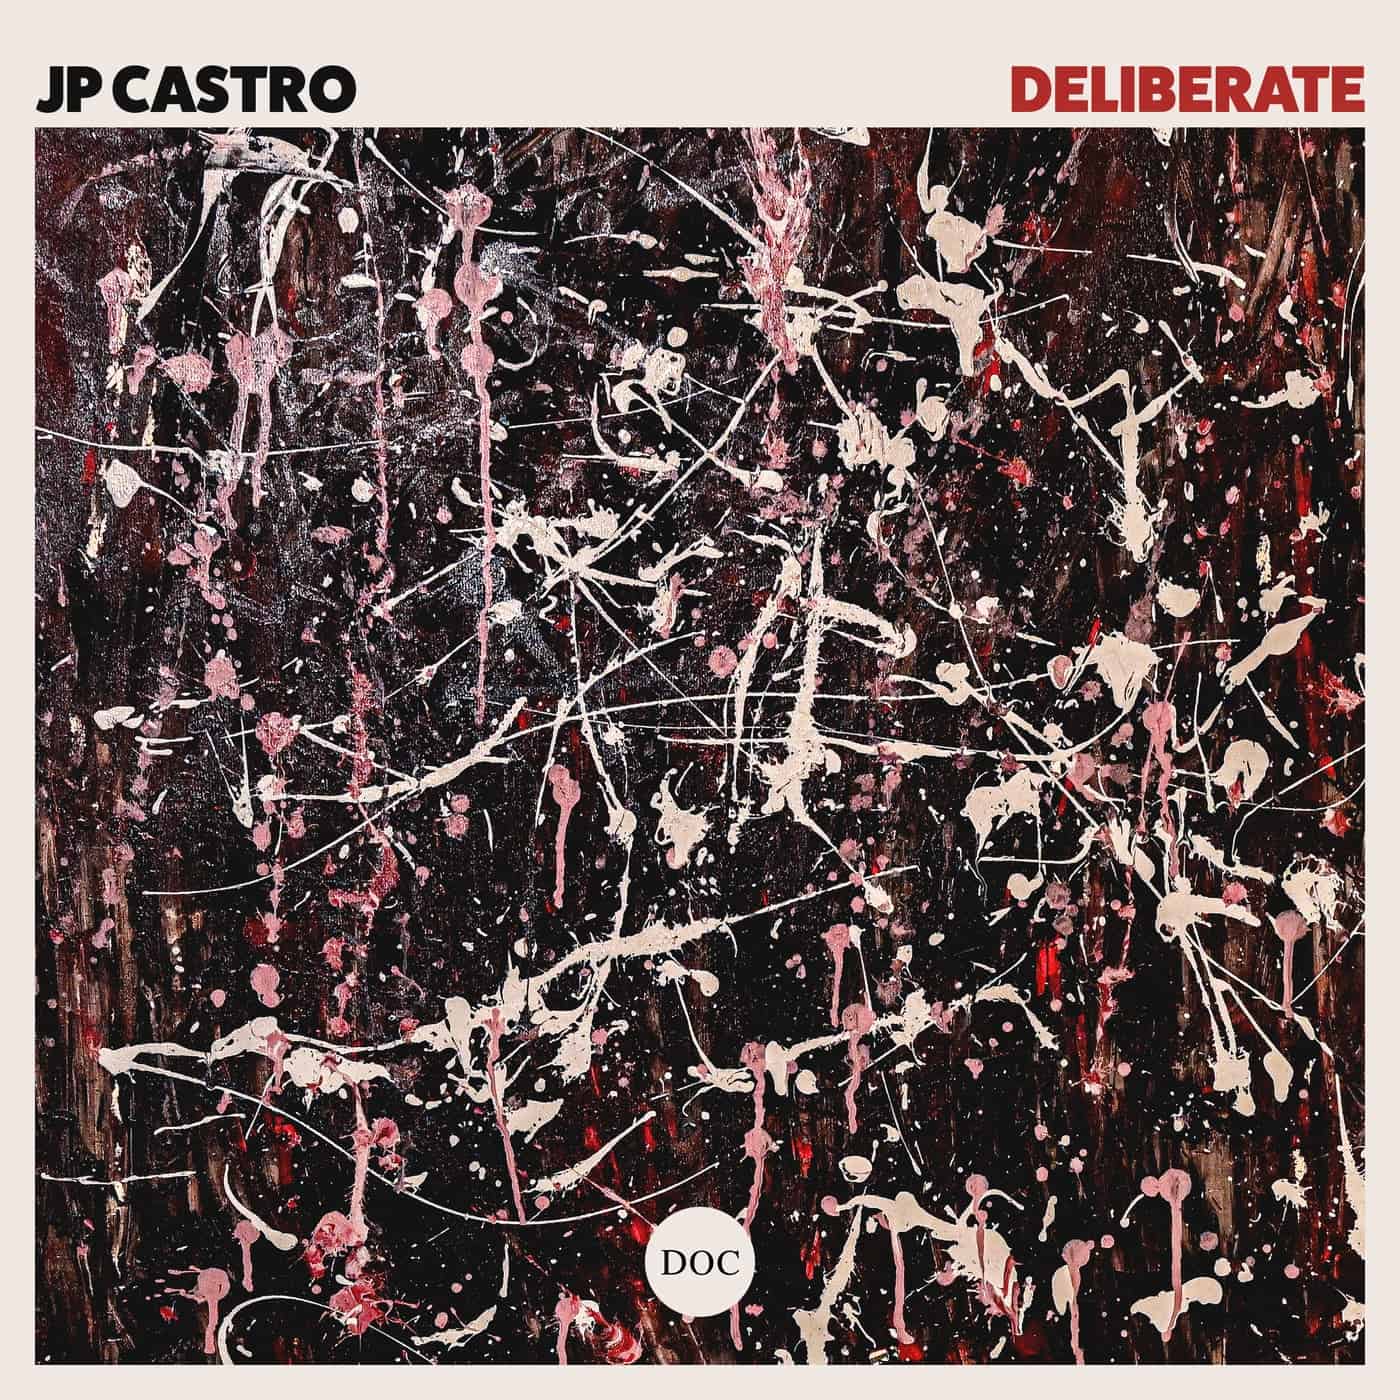 Download JP Castro - Deliberate on Electrobuzz